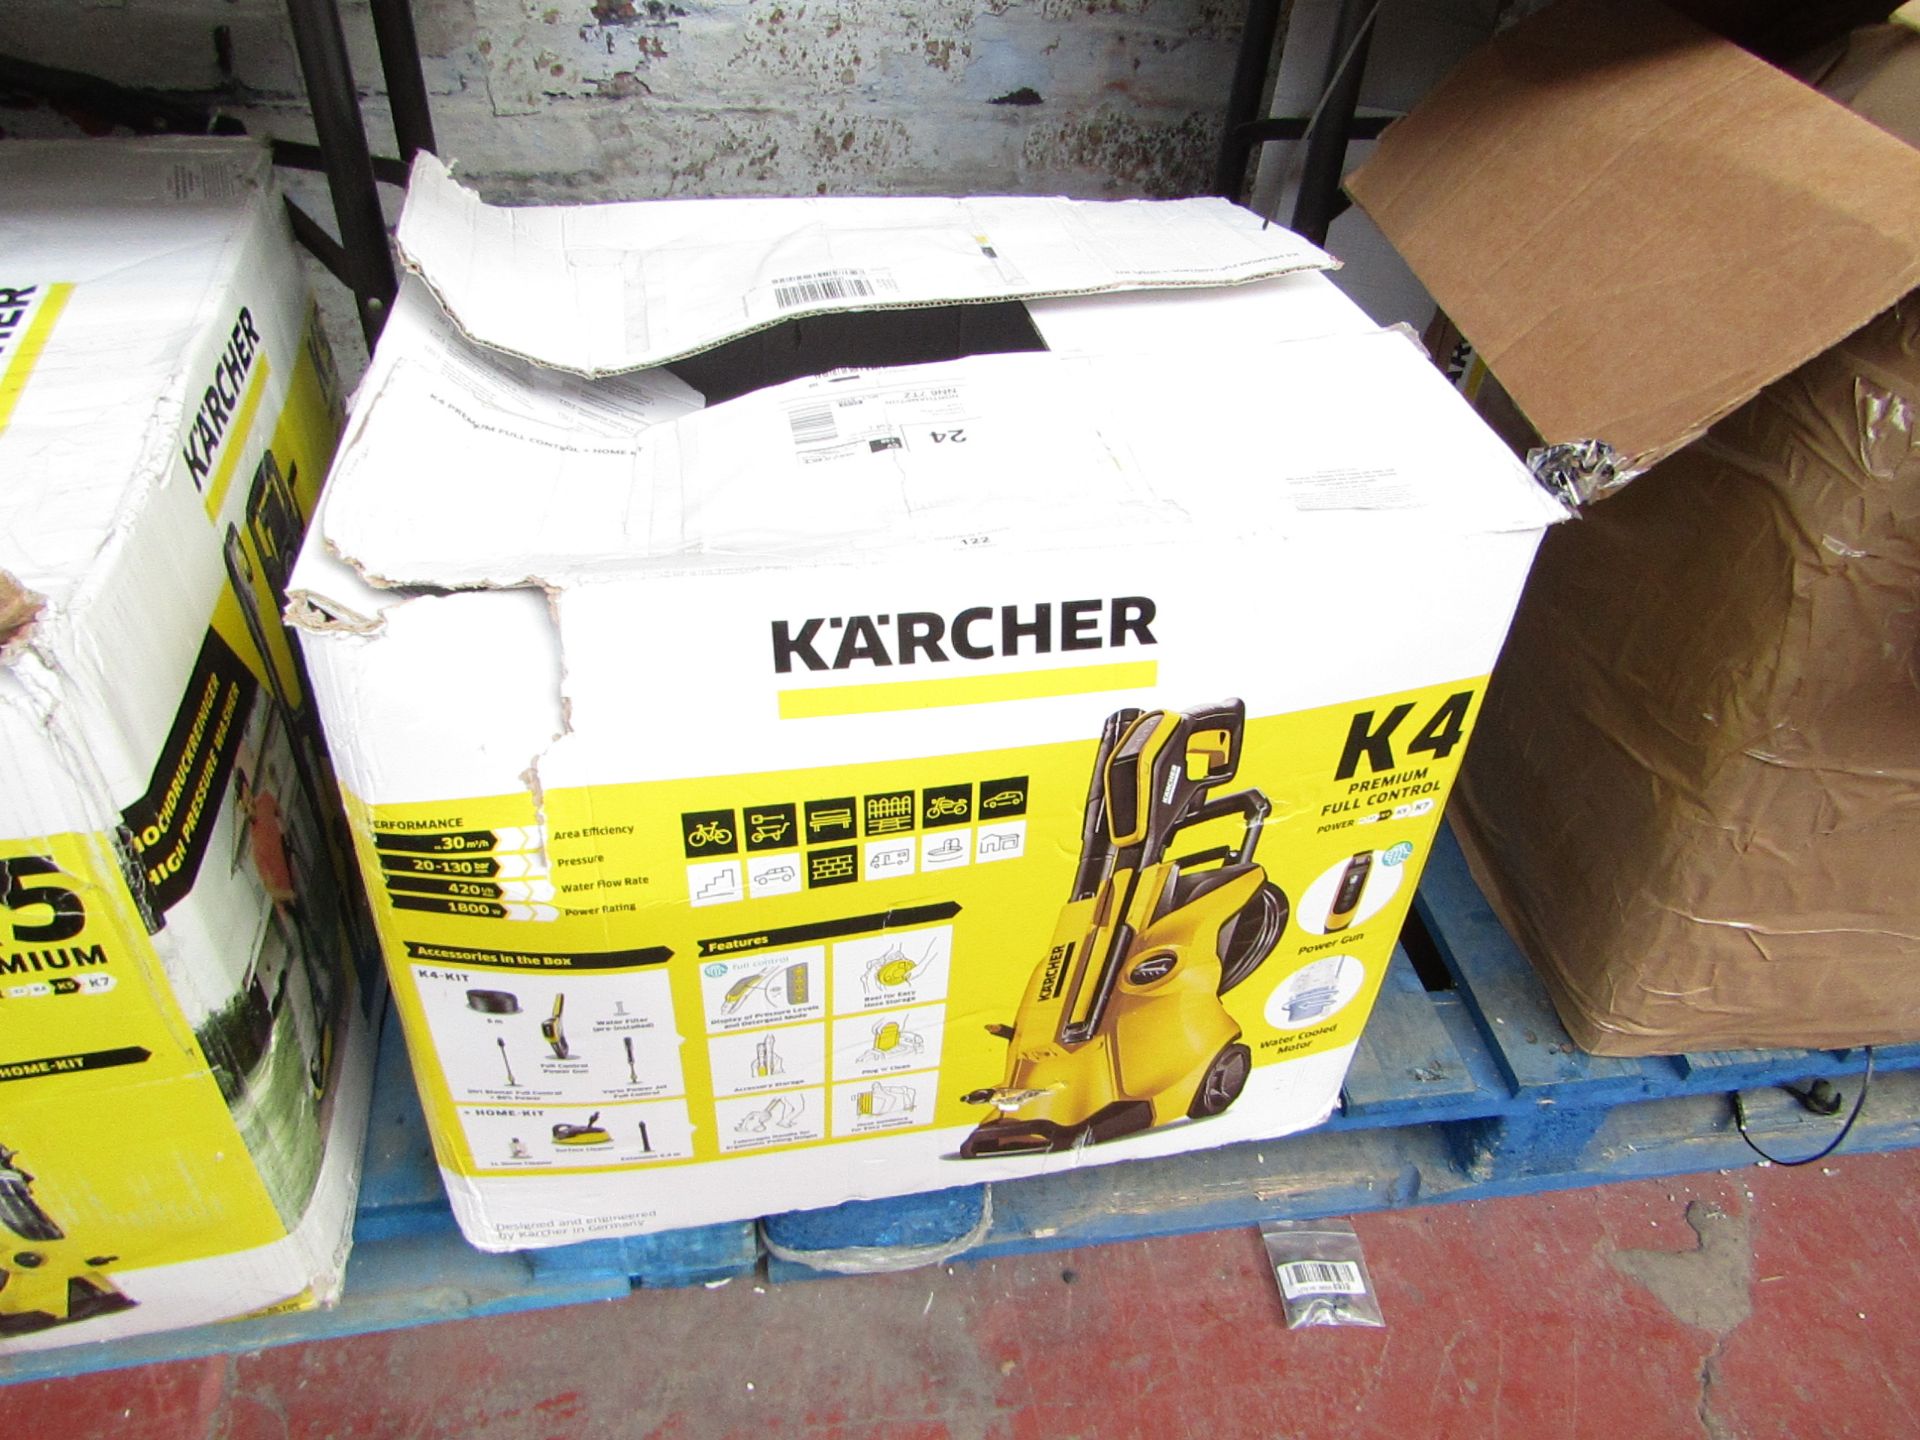 Karcher K4 Premium control pressure washer, powers on but not fully tested functions. Includes lance